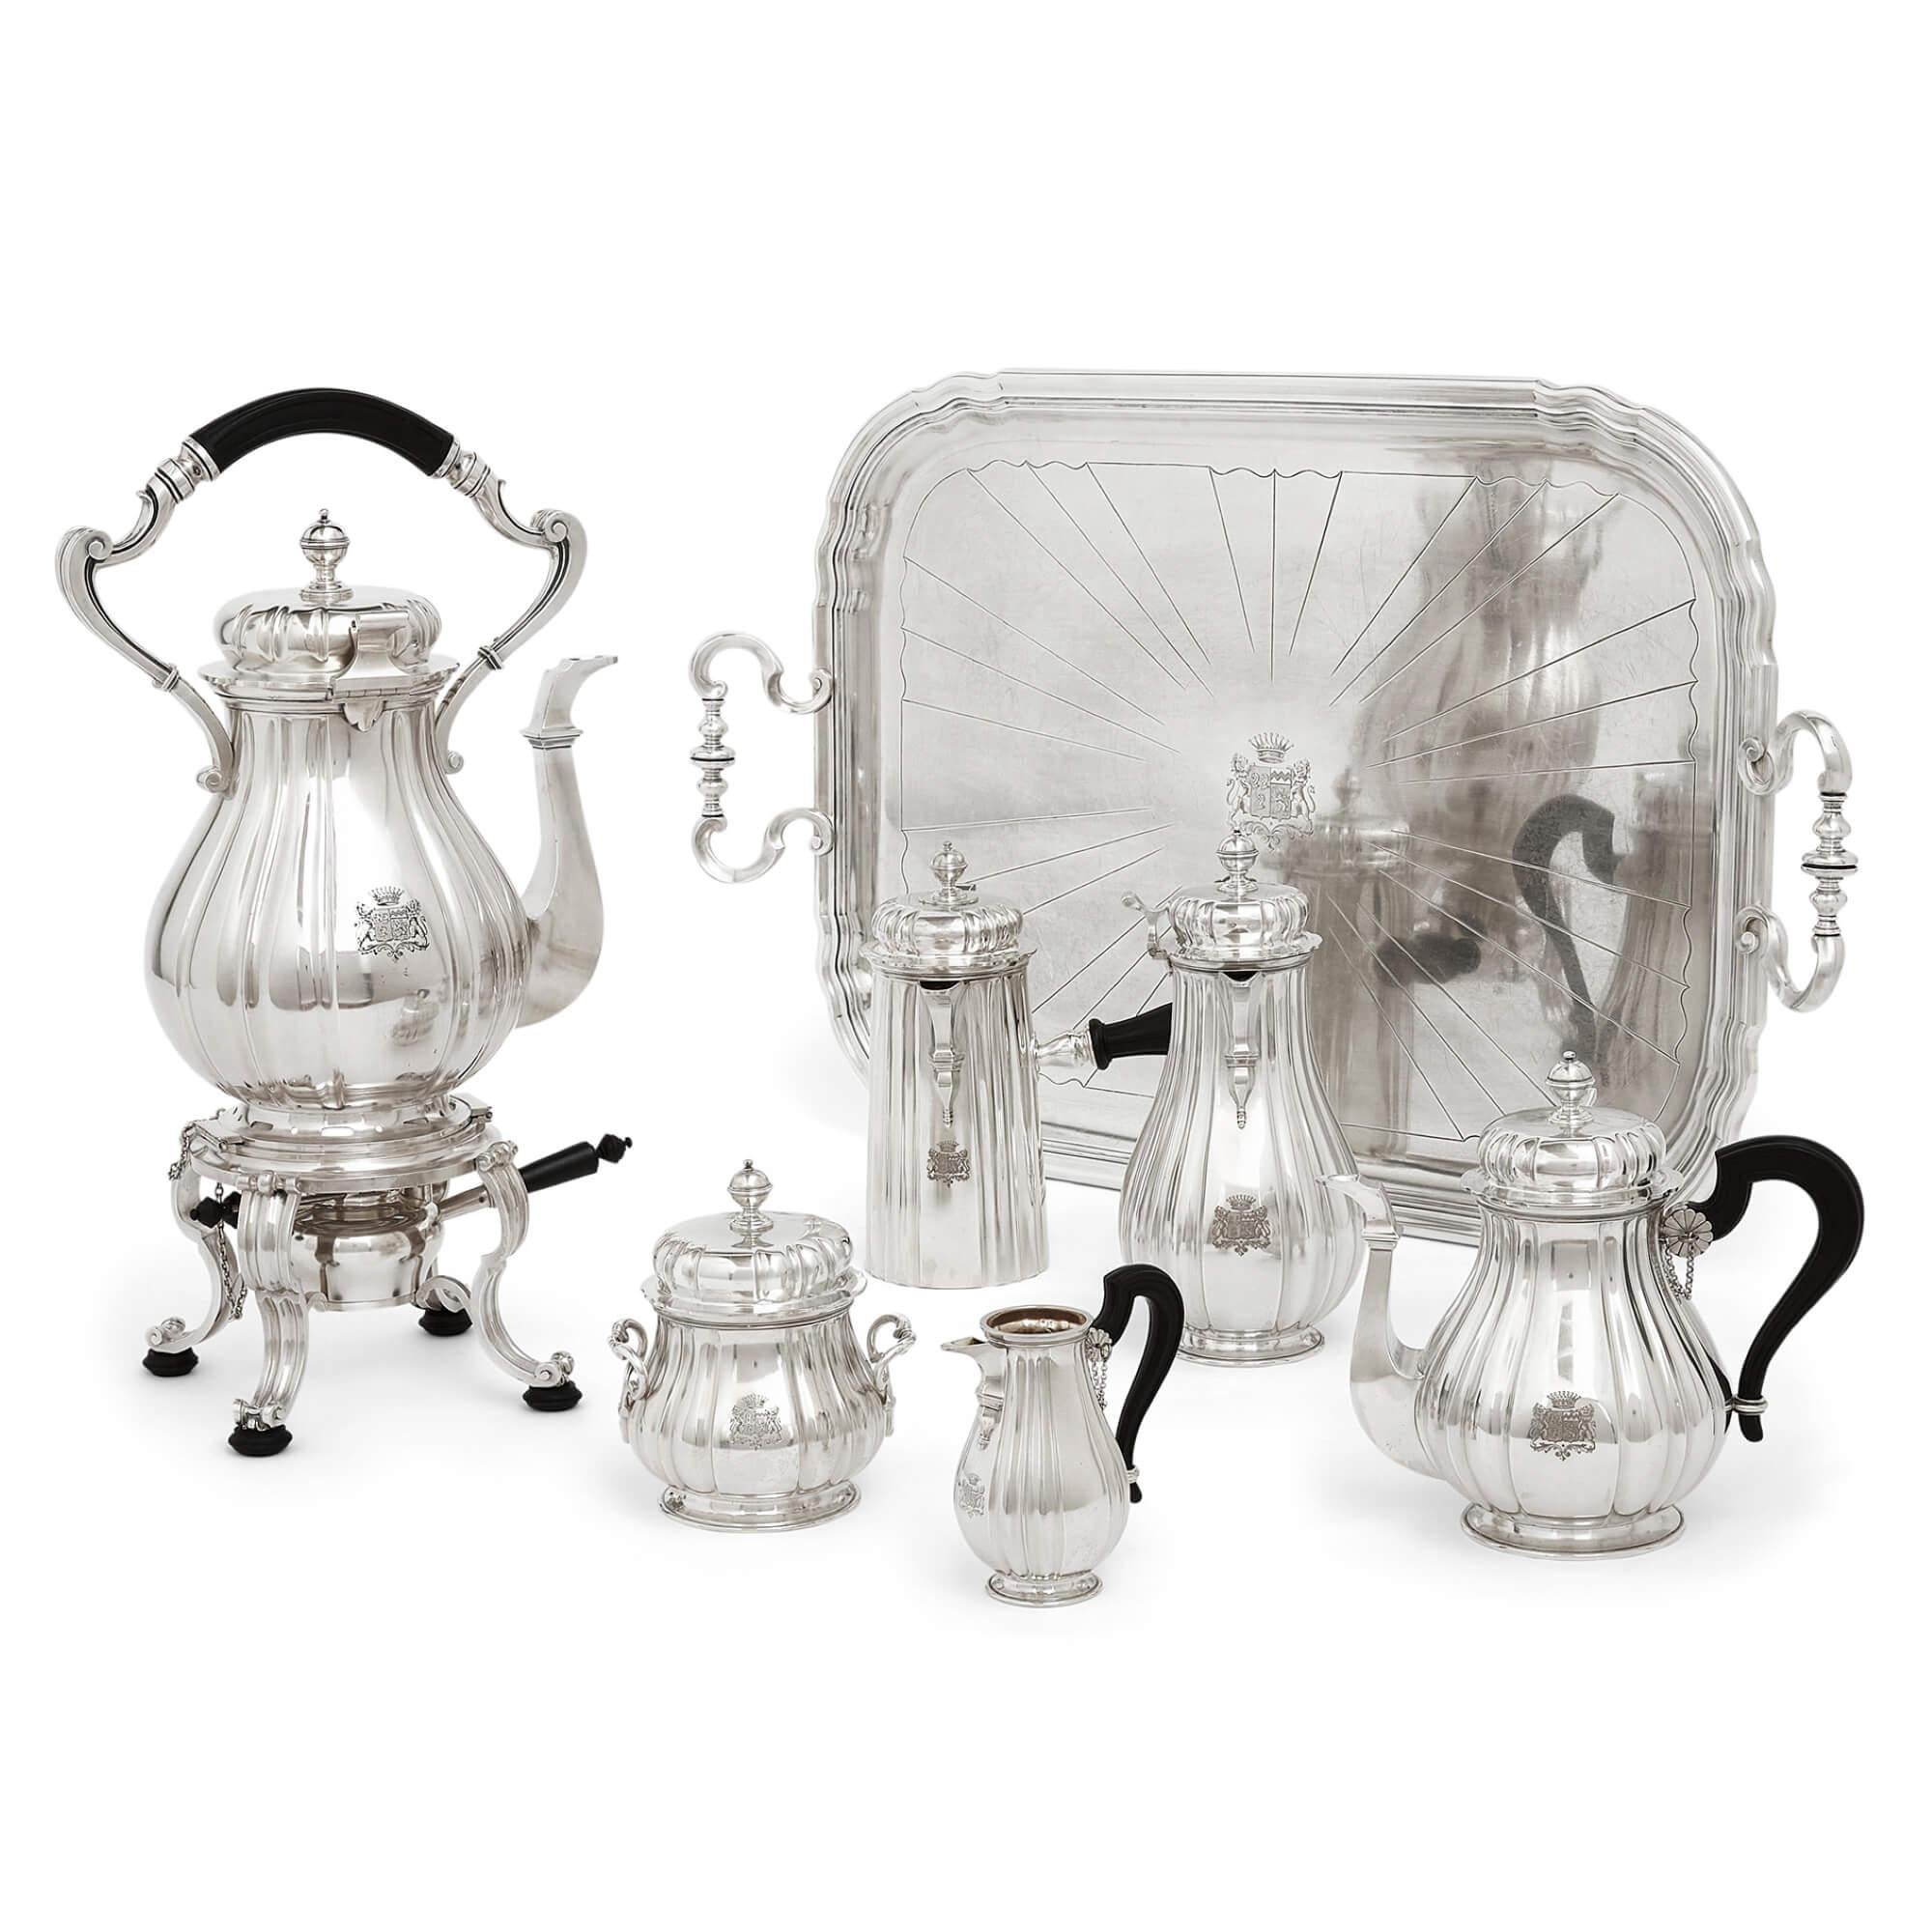 Silver and silver plate tea and coffee set by Cardeilhac
French, Early 20th Century
Tray: Height 7cm, width 73cm, depth 45cm
Pot on stand: Height 49cm, width 27cm, depth 17cm
Silver weight: 2,850 grams

This exquisite seven-piece tea, coffee, and